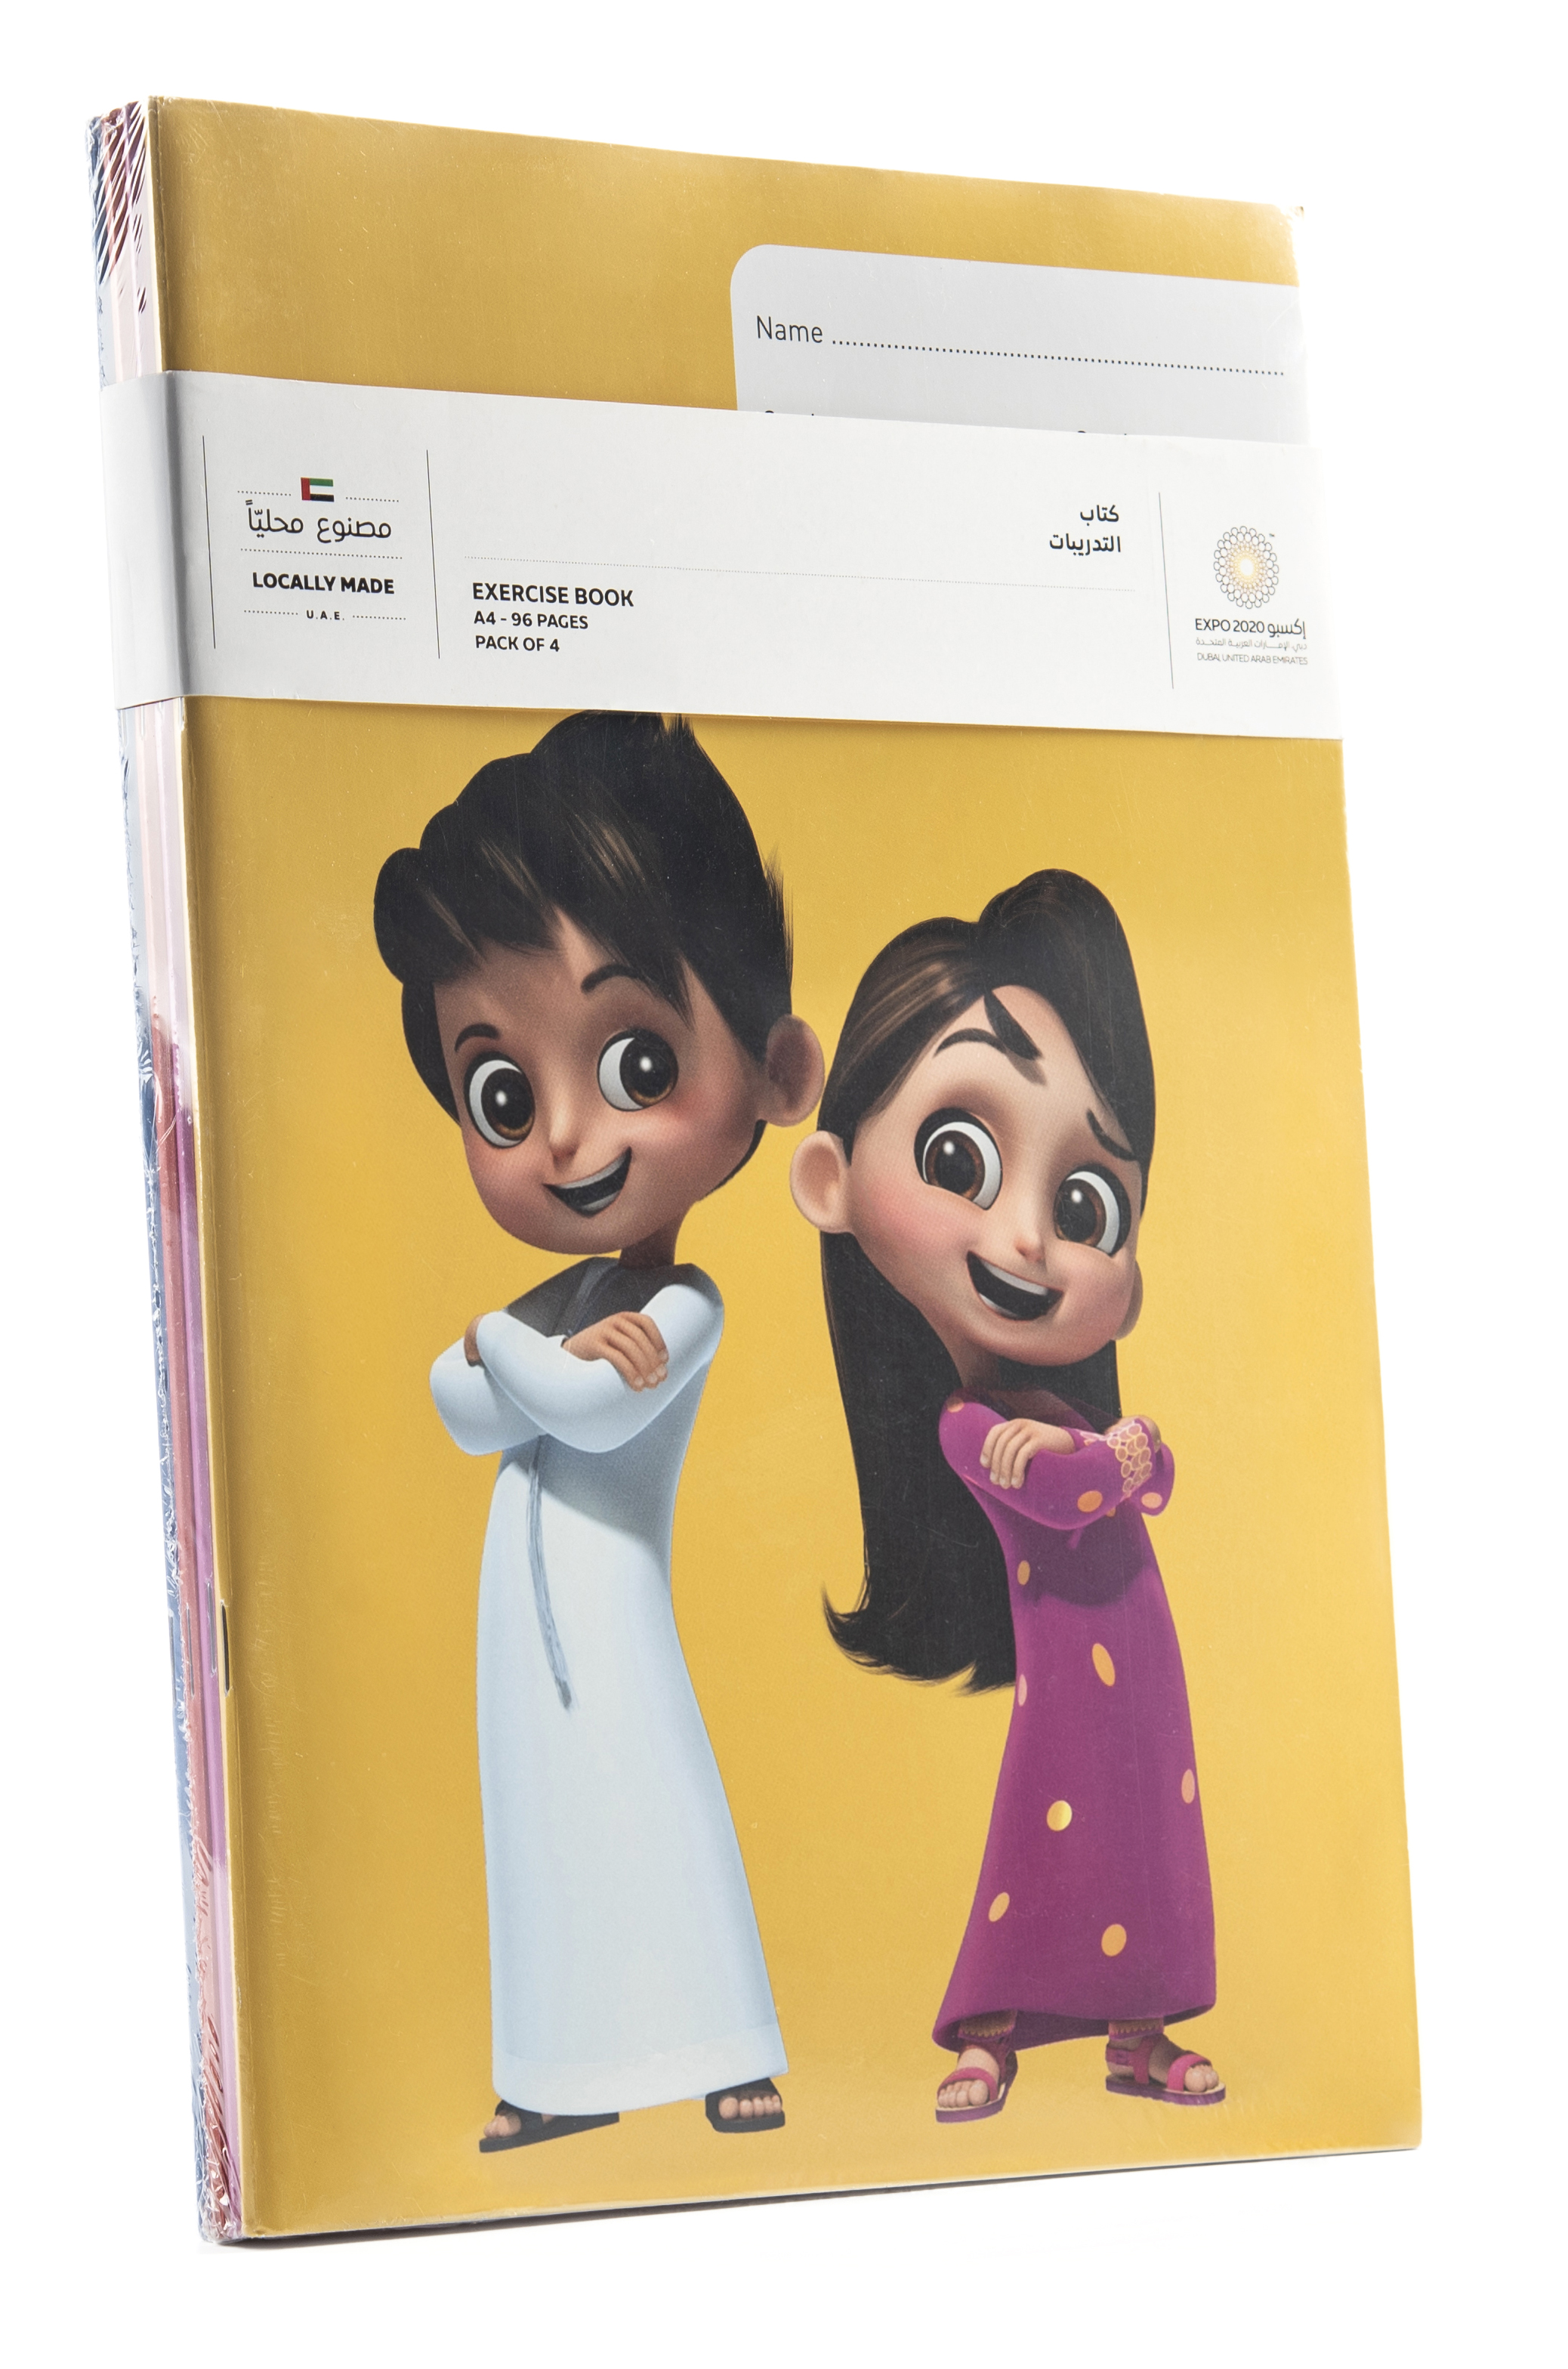 Expo 2020 Dubai Mascots A4 Exercise Books Pack of 4 - 96 Pages